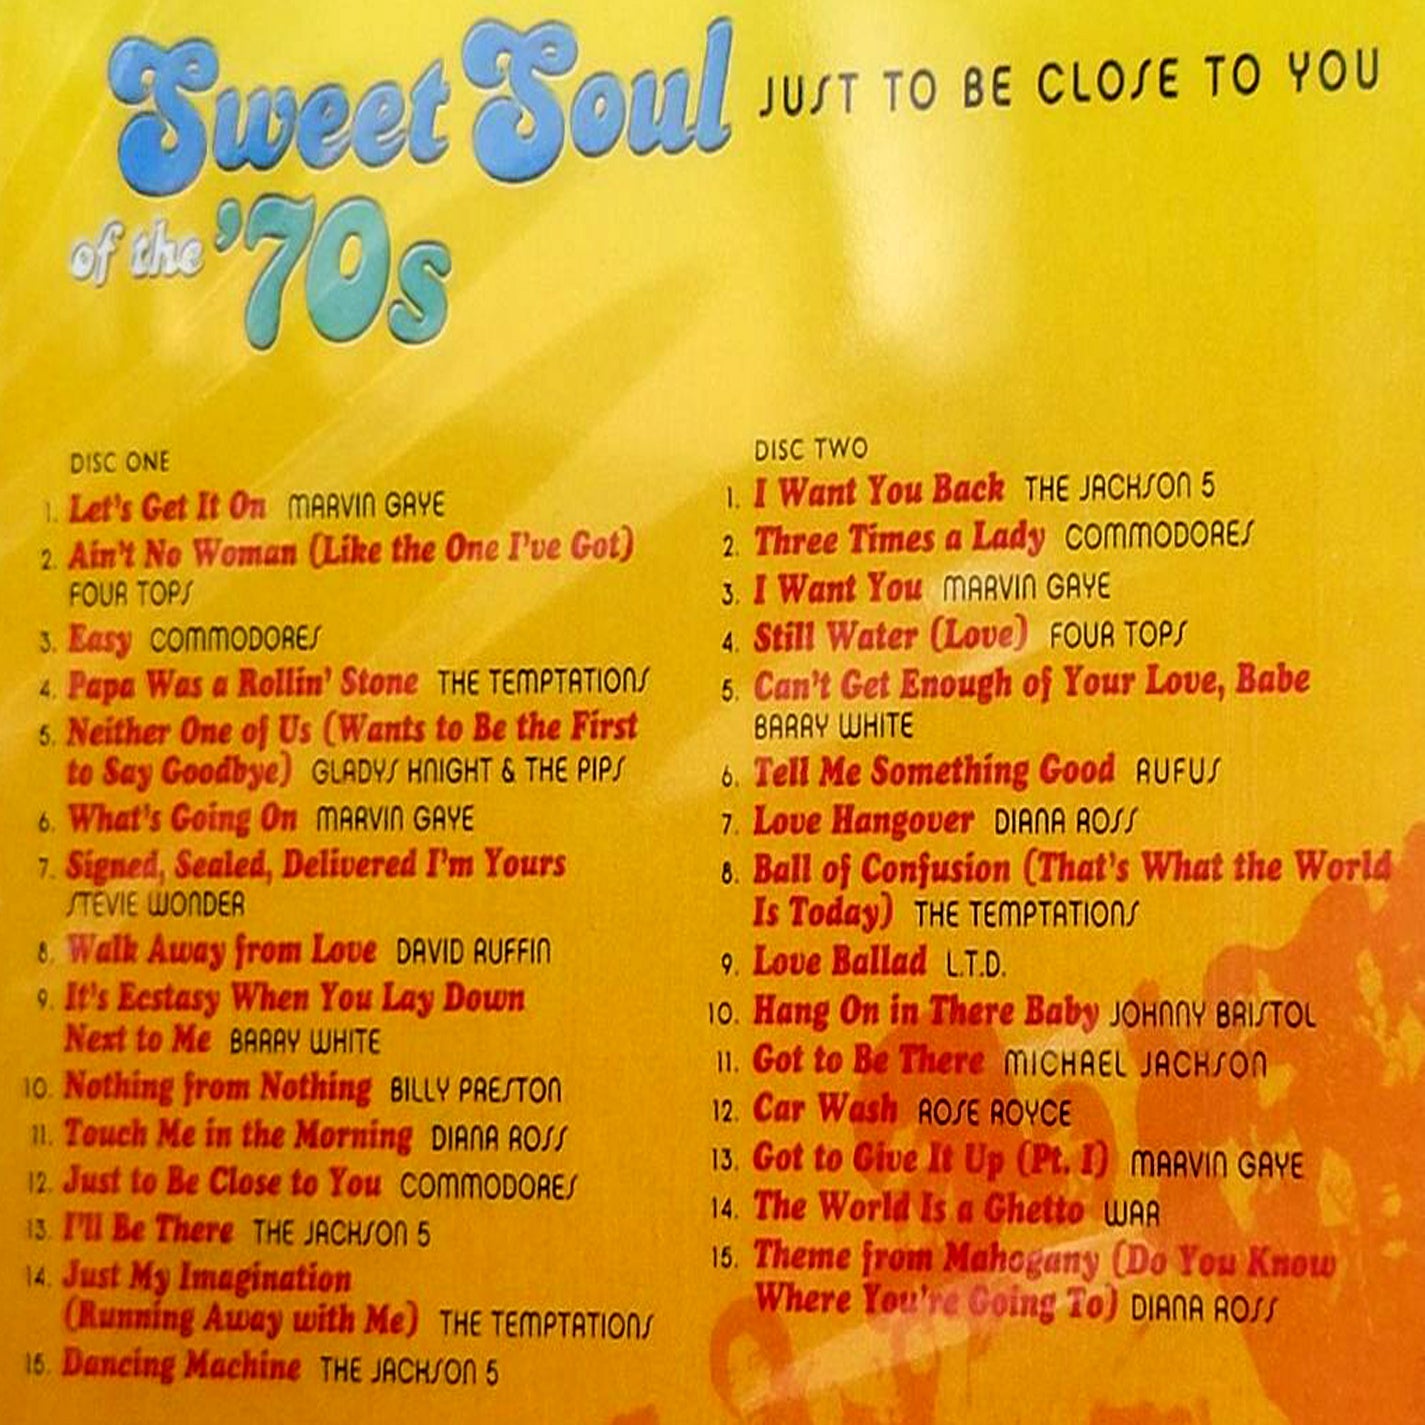 SWEET SOUL OF THE 70'S - JUST TO BE CLOSE TO YOU - VARIOUS ARTISTS (CD LP) c1970